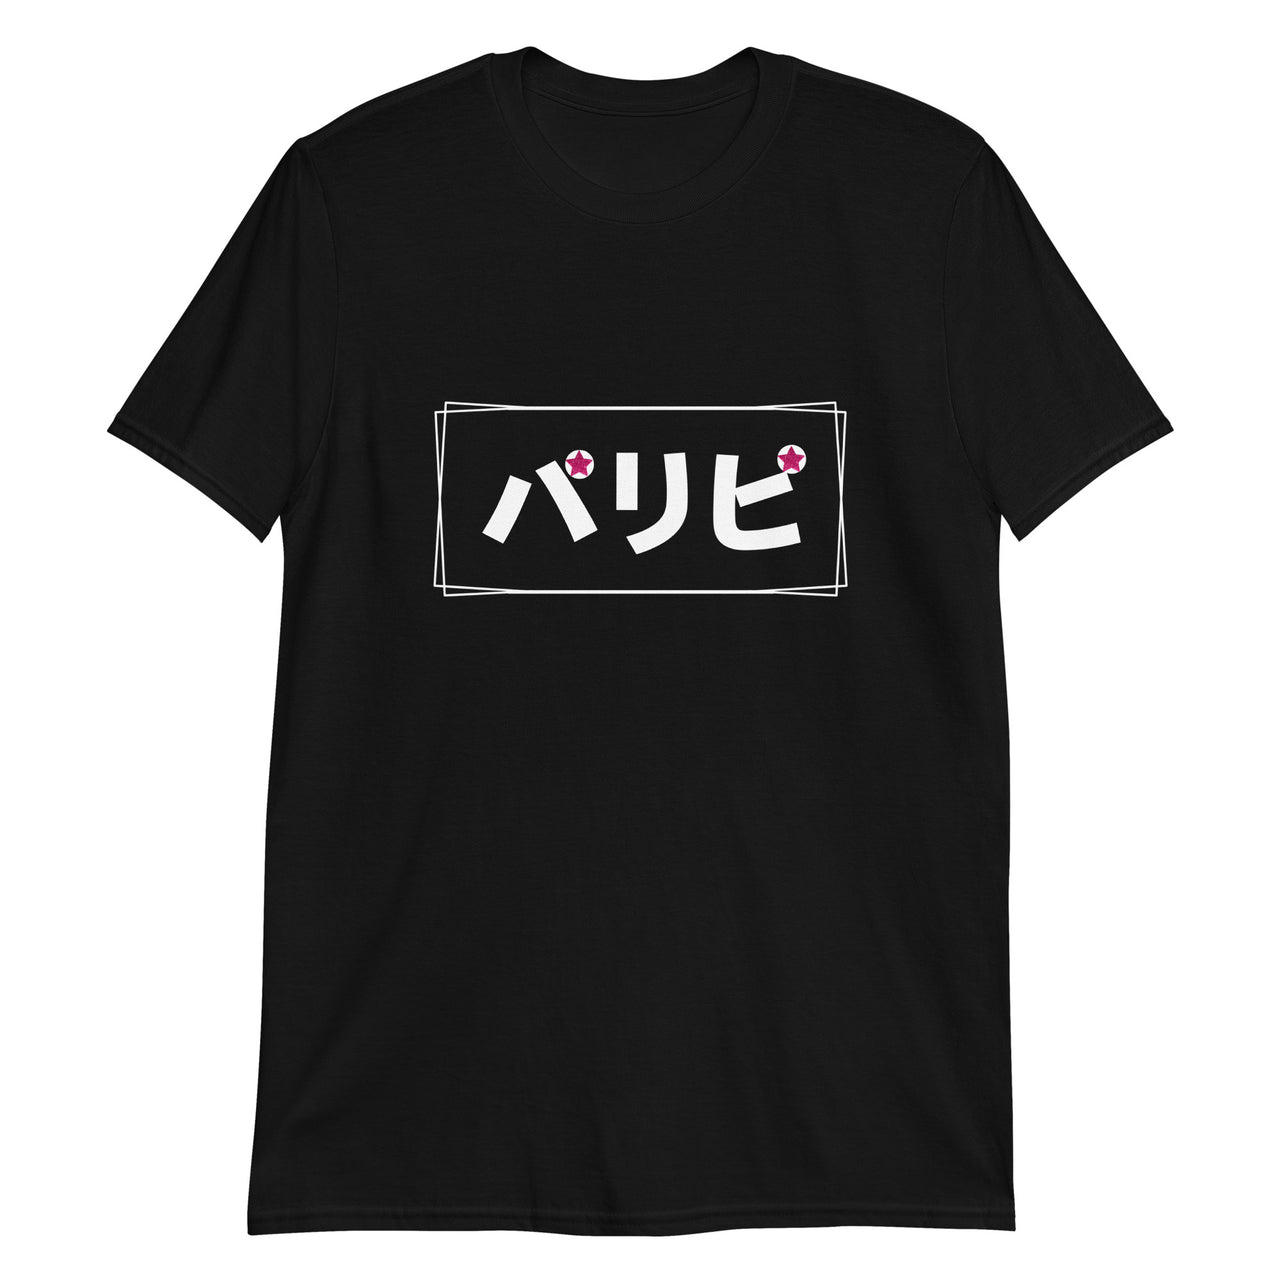 Paripi - Party People in Japanese T-Shirt